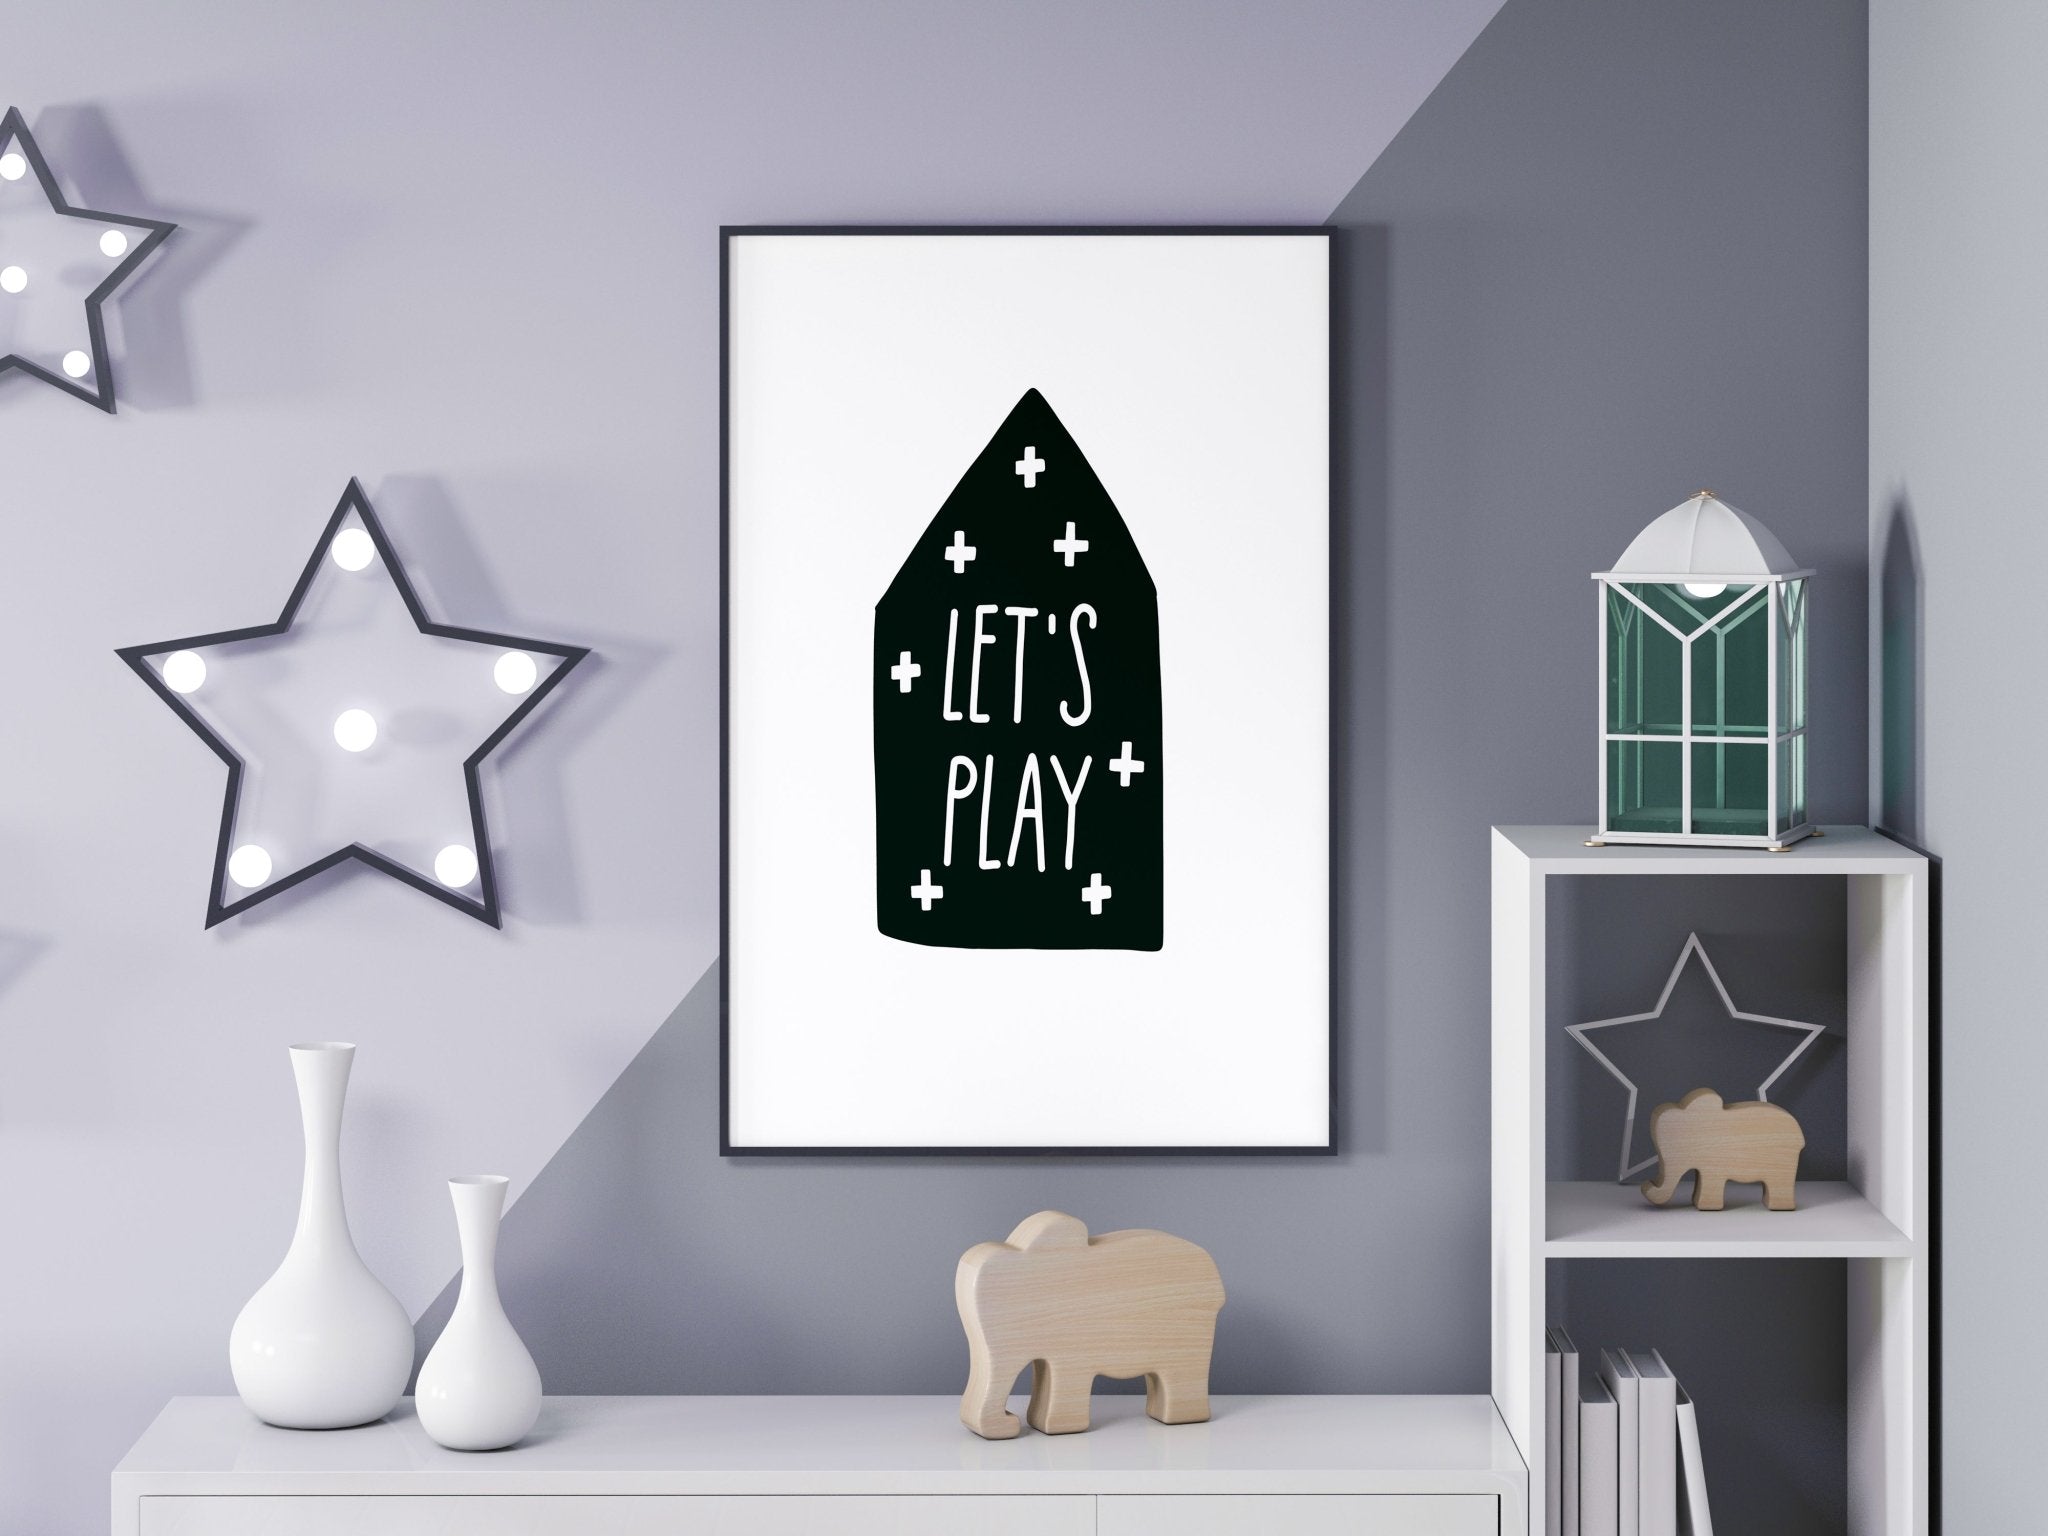 Let's Play - D'Luxe Prints